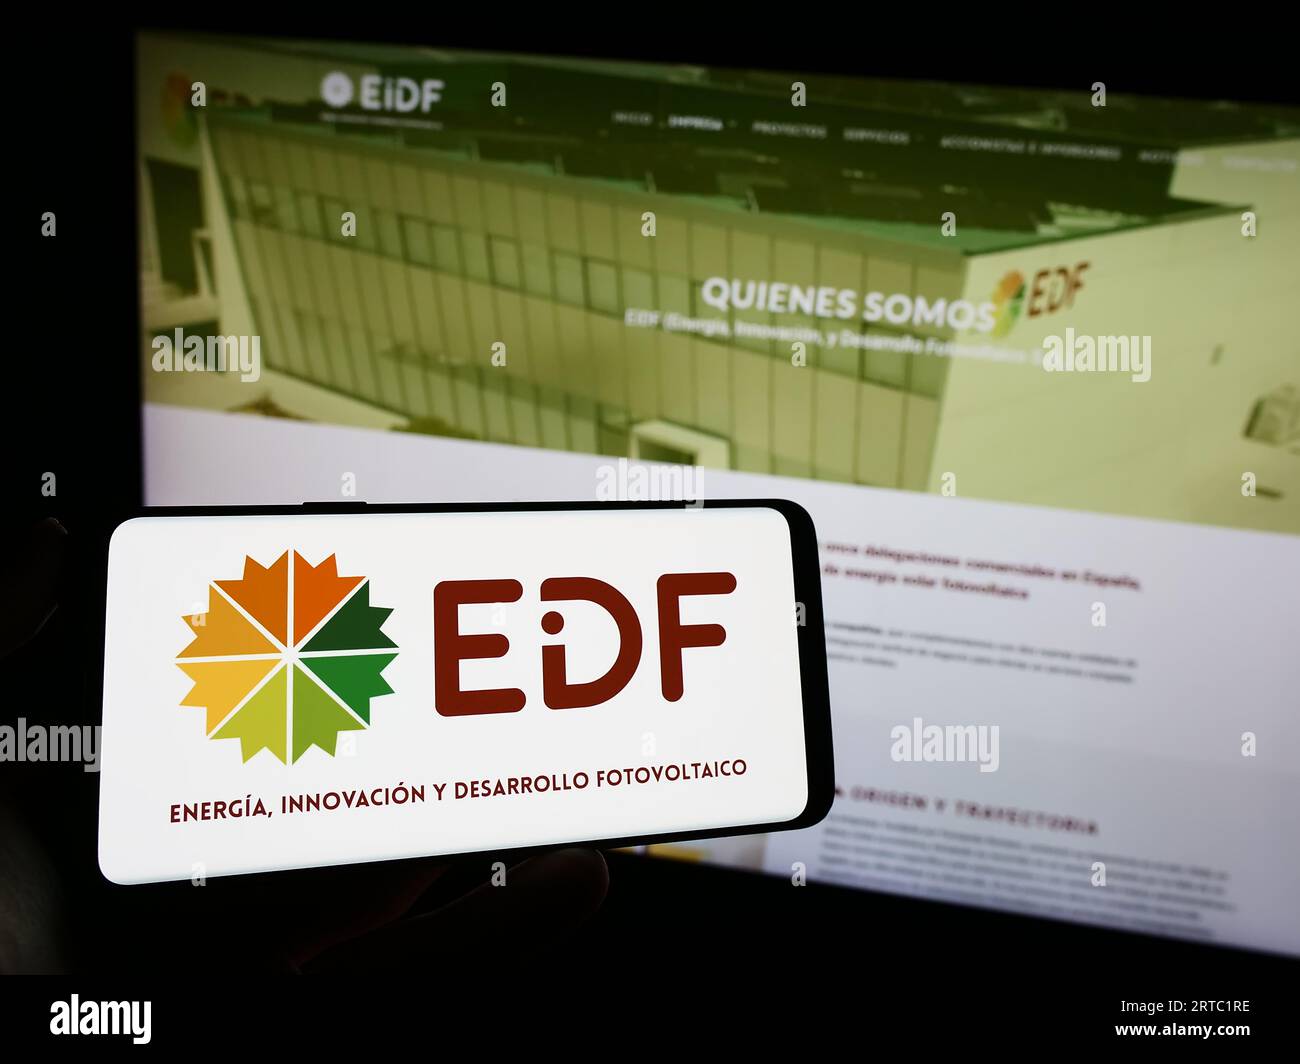 Person holding mobile phone with logo of Spanish photovoltaics company EiDF Solar on screen in front of business web page. Focus on phone display. Stock Photo